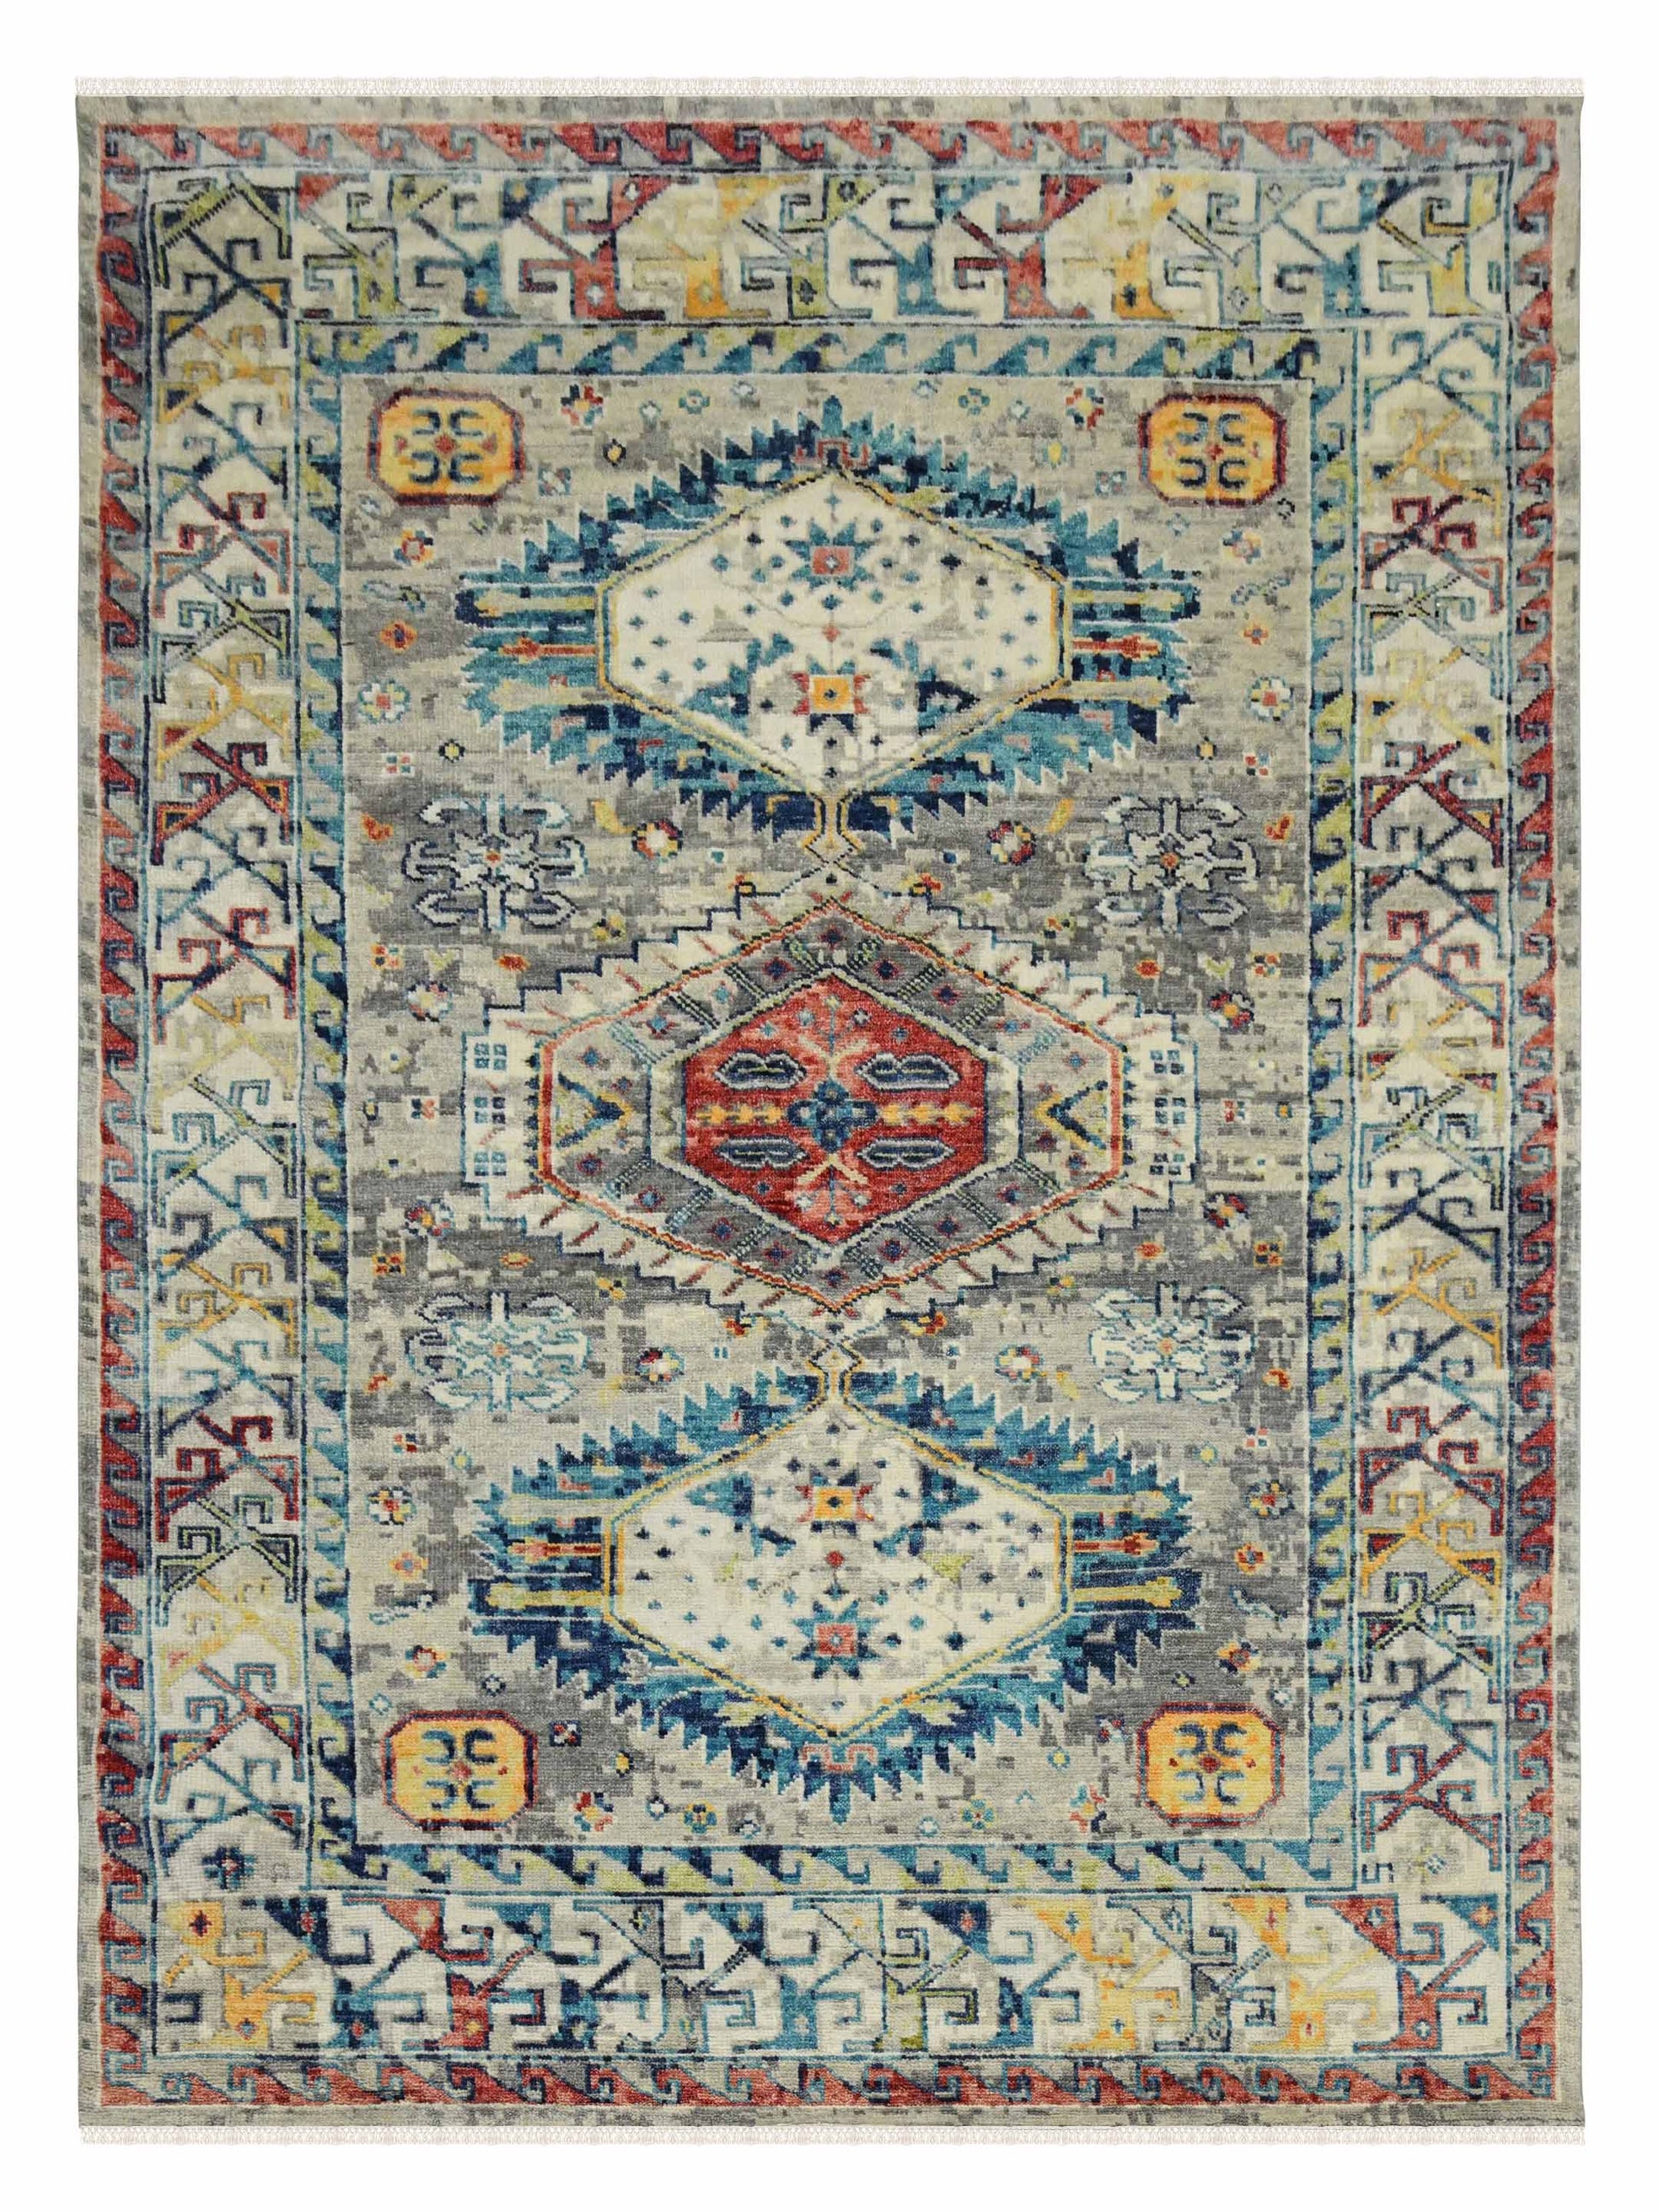 Limited Woodburn WOD-554 SILVER Traditional Knotted Rug